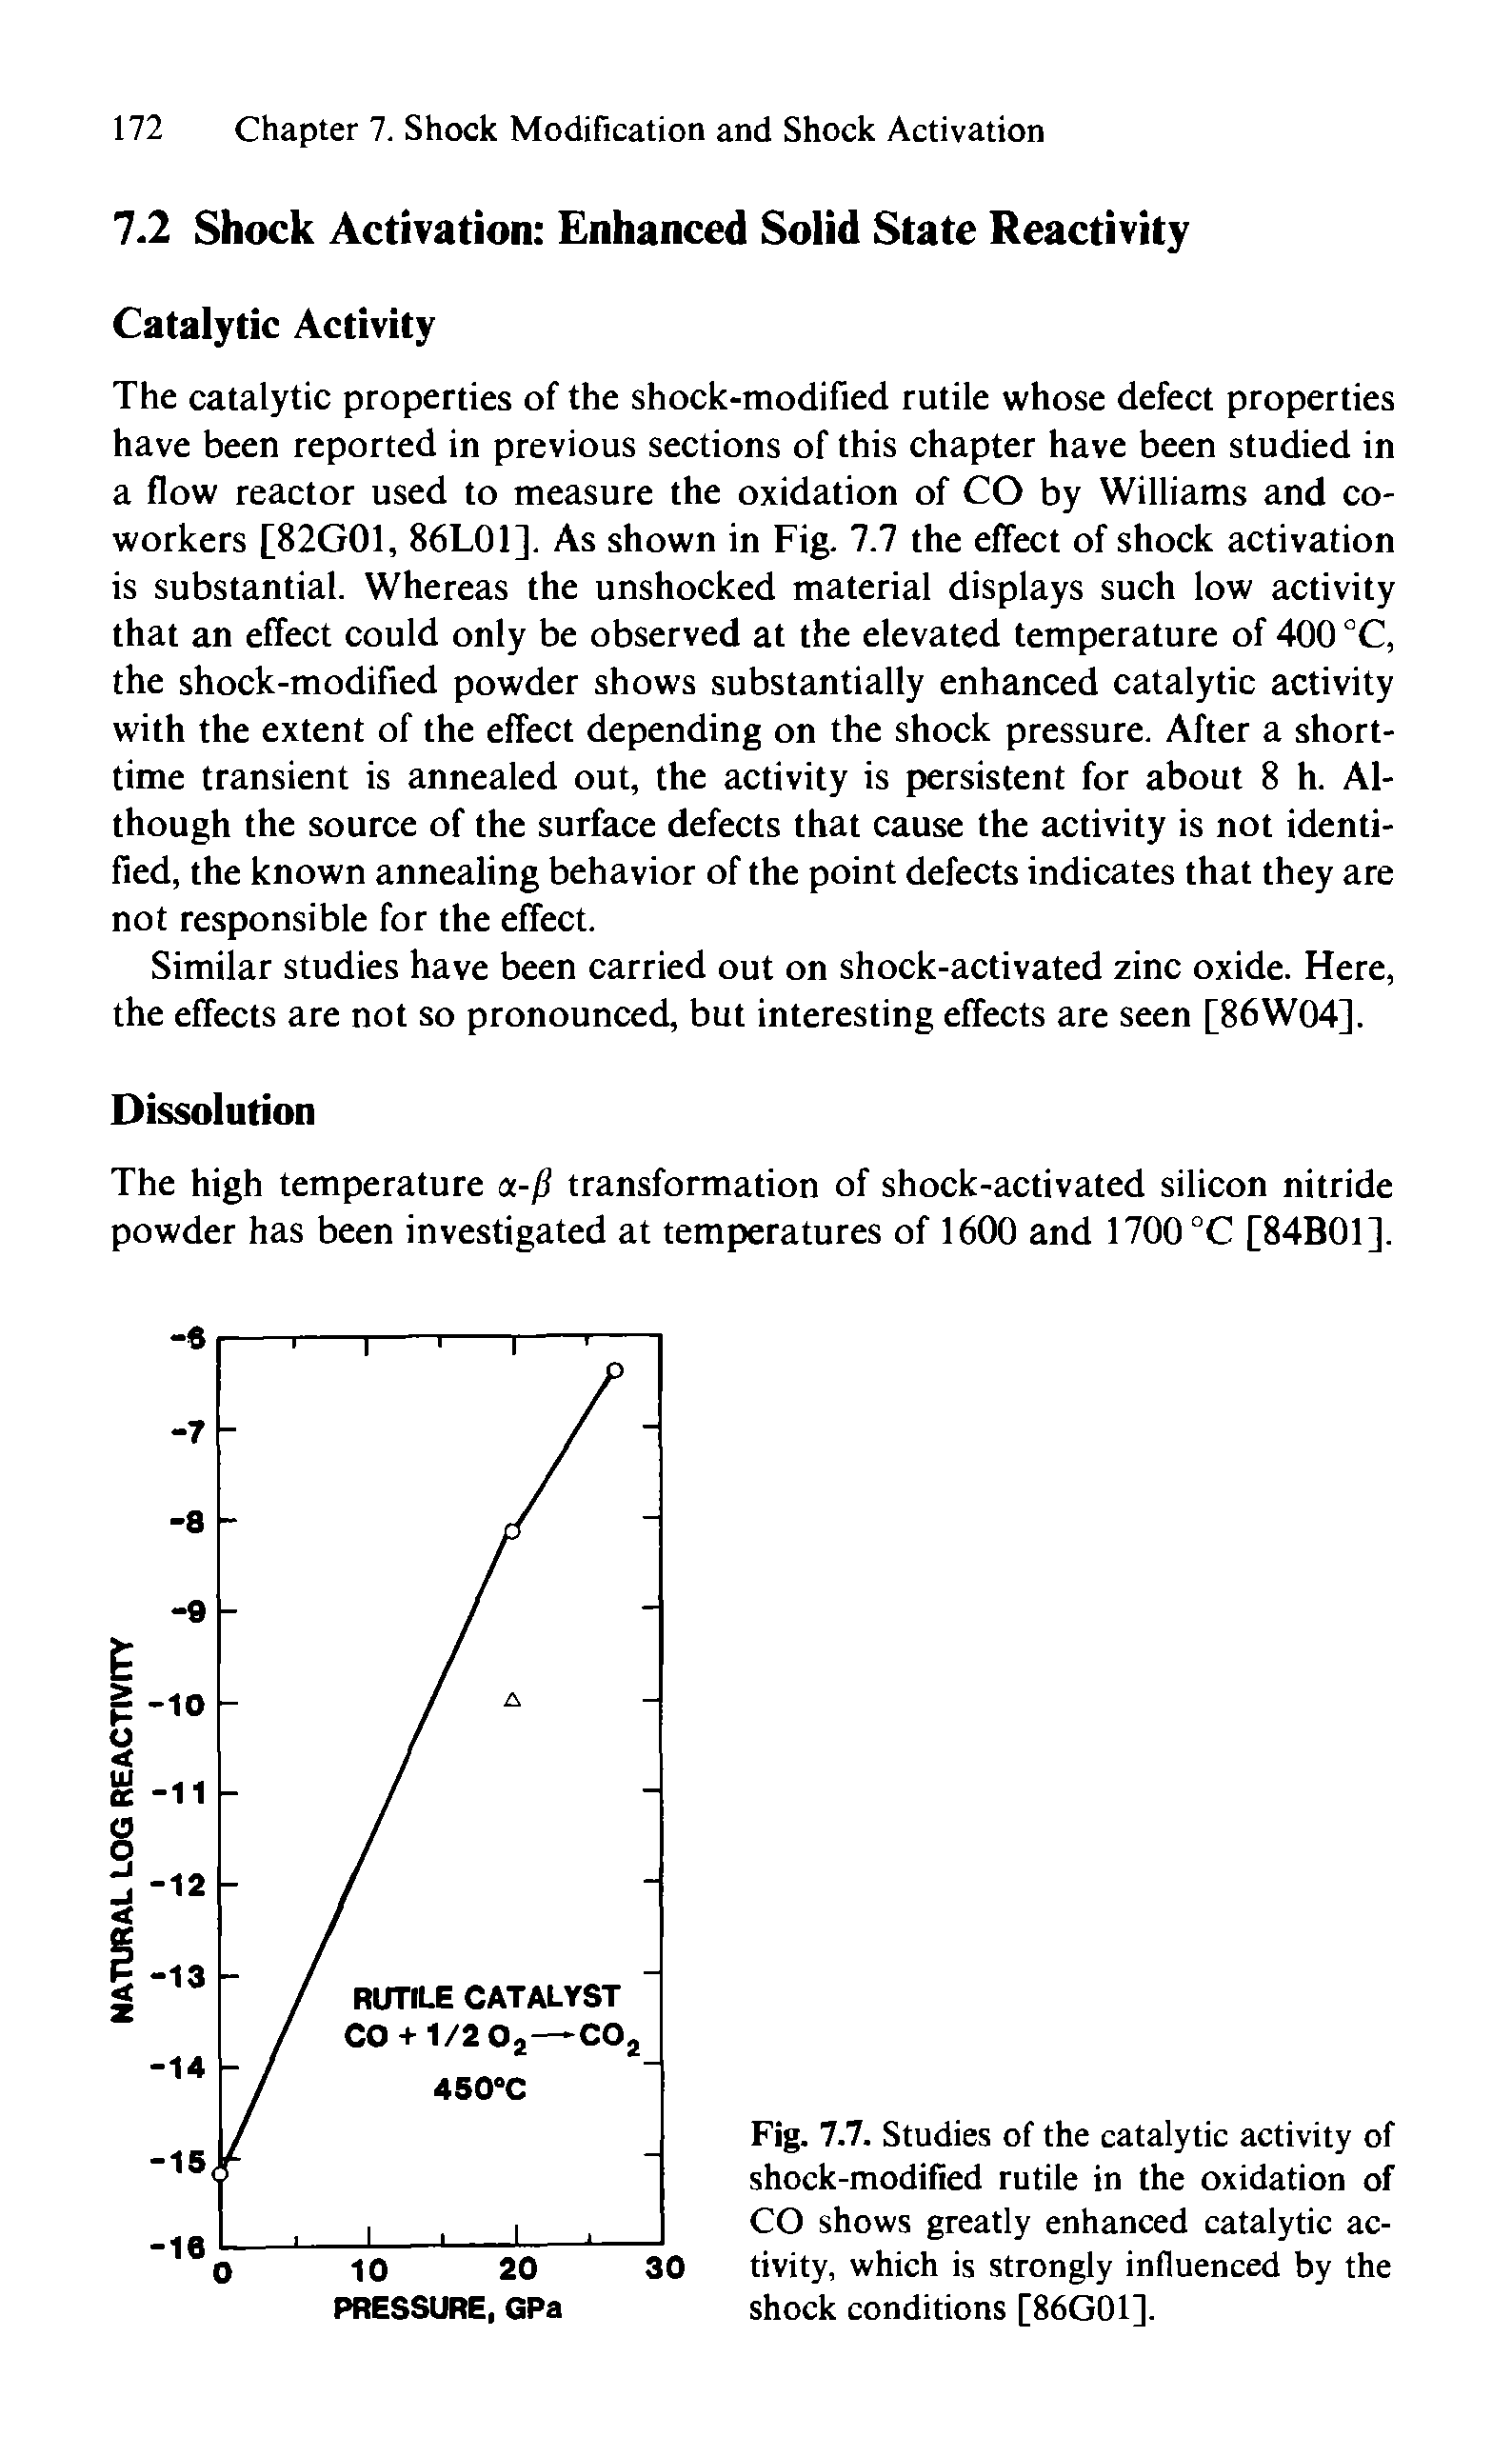 Fig. 7.7. Studies of the catalytic activity of shock-modified rutile in the oxidation of CO shows greatly enhanced catalytic activity, which is strongly influenced by the shock conditions [86G01].